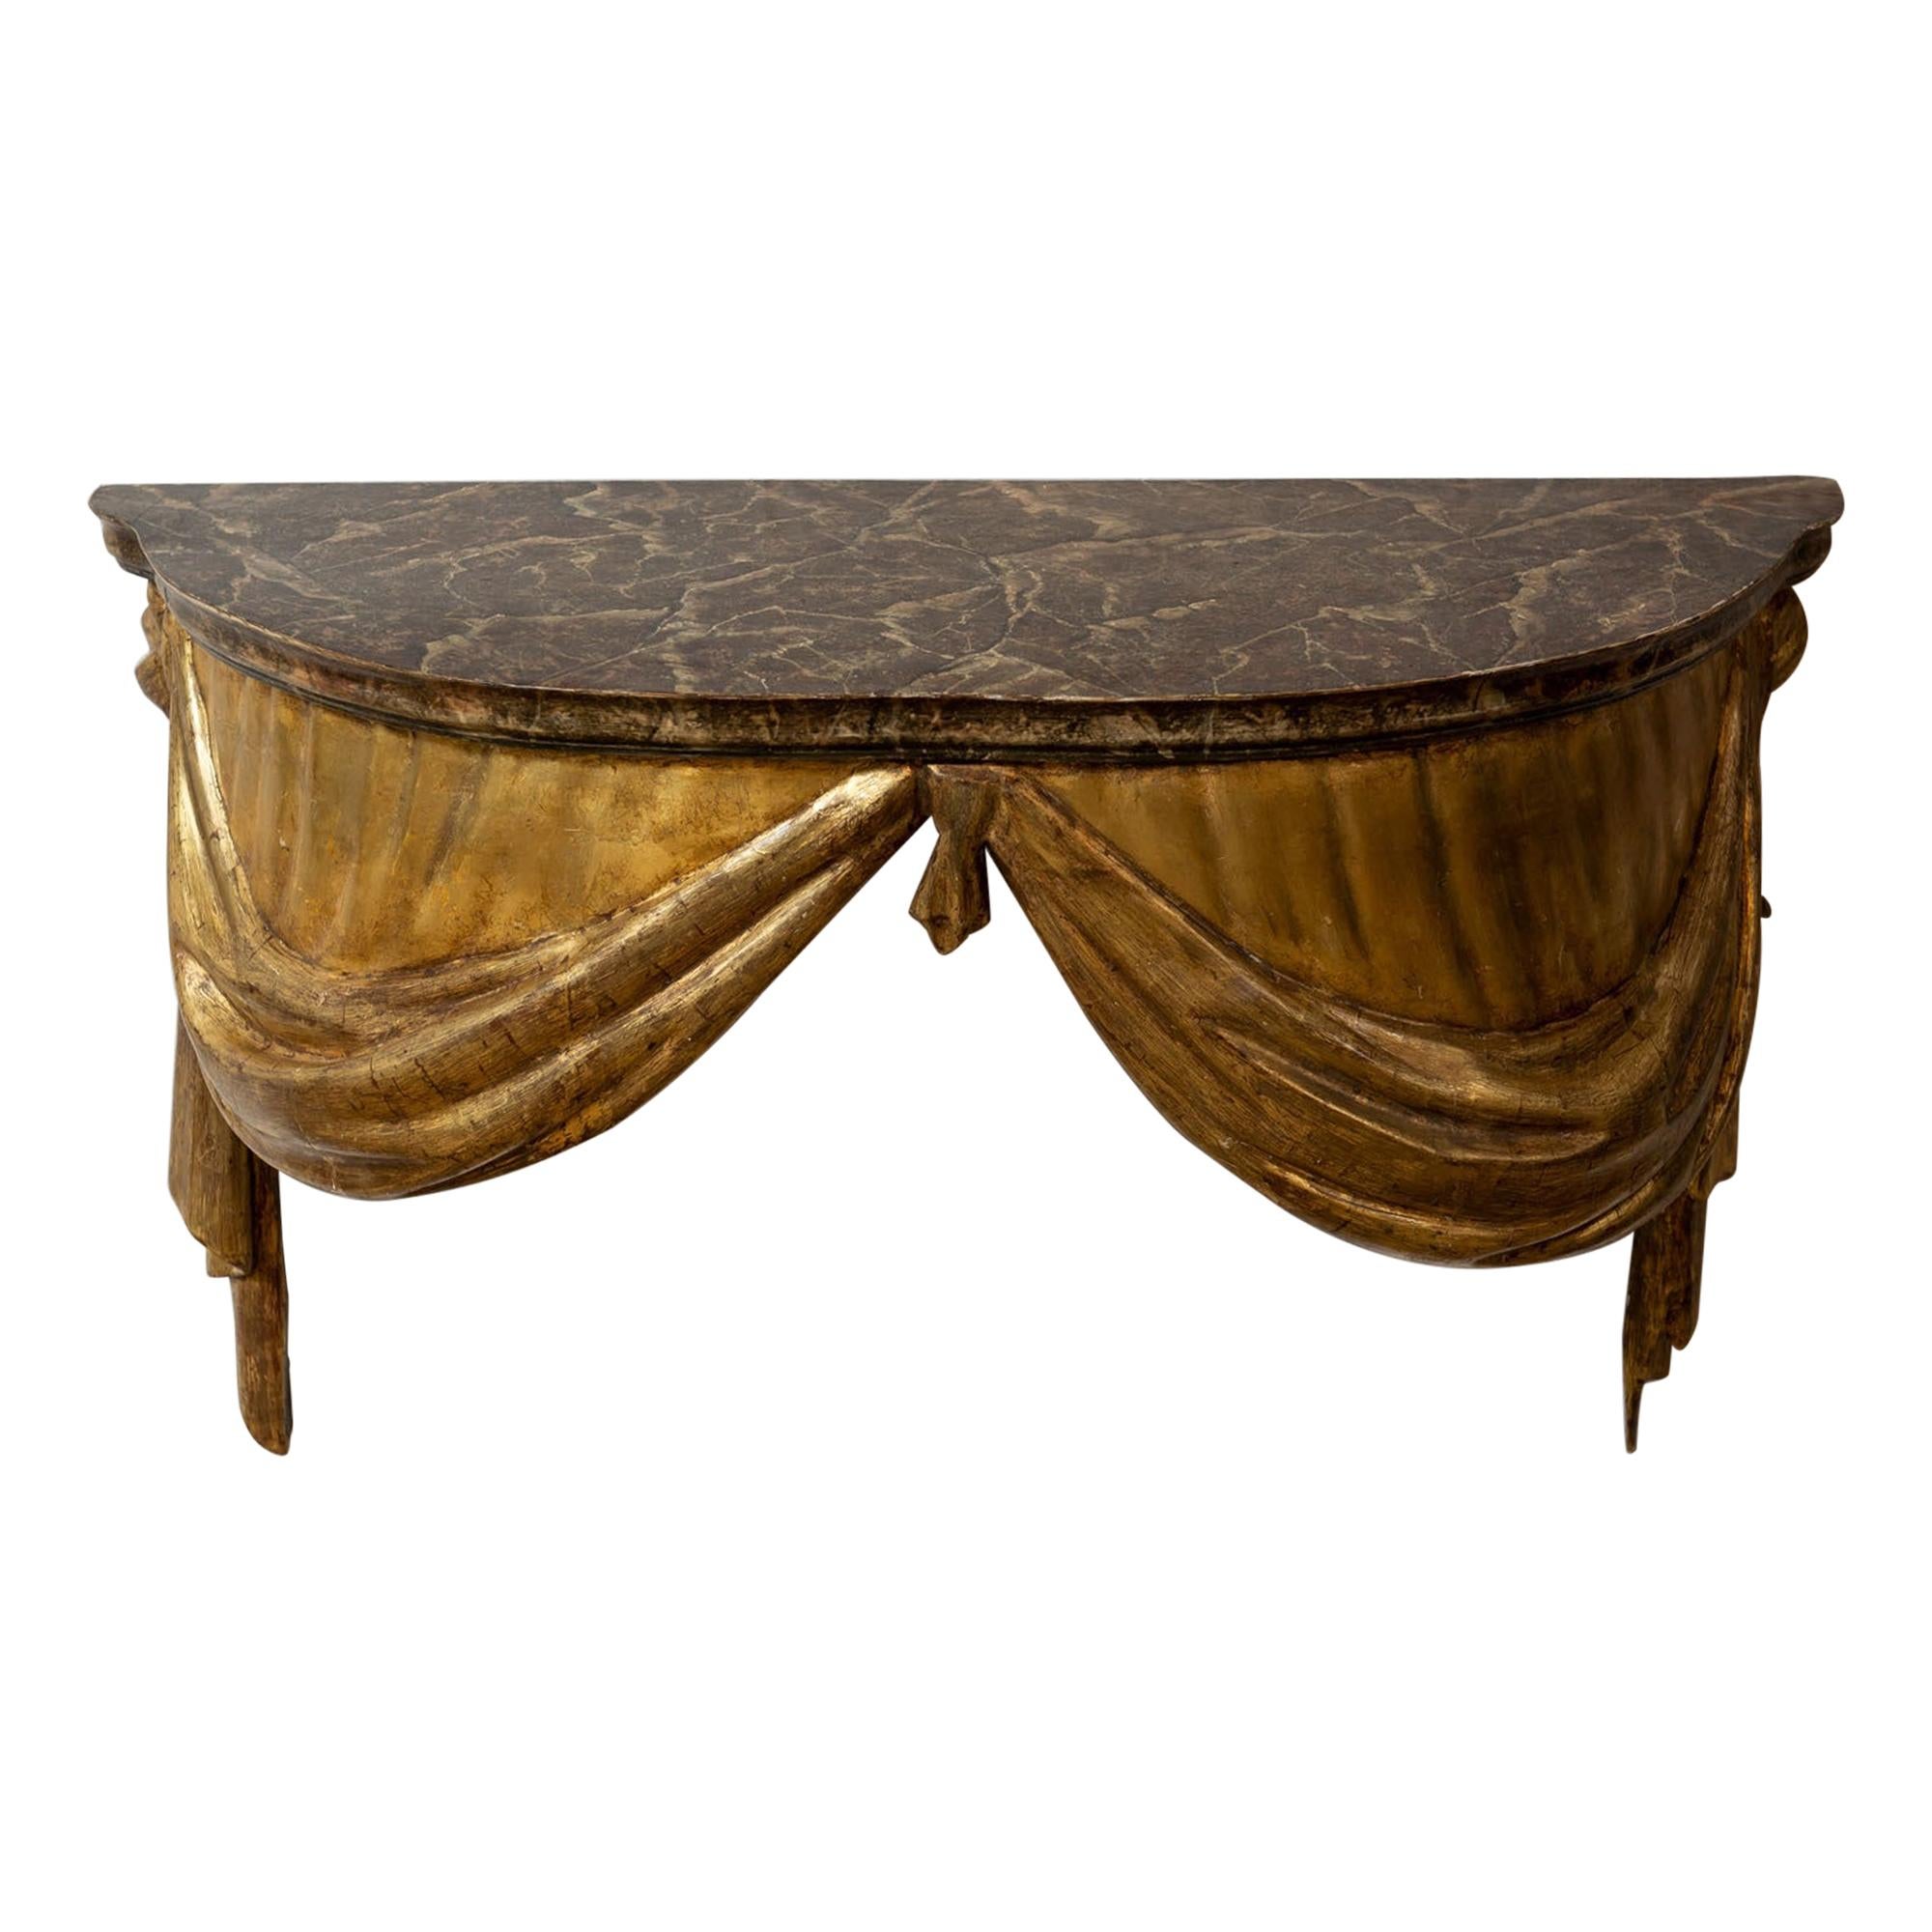 Highly Decorative Italian Painted and Gilded Console Table, circa 19th Century